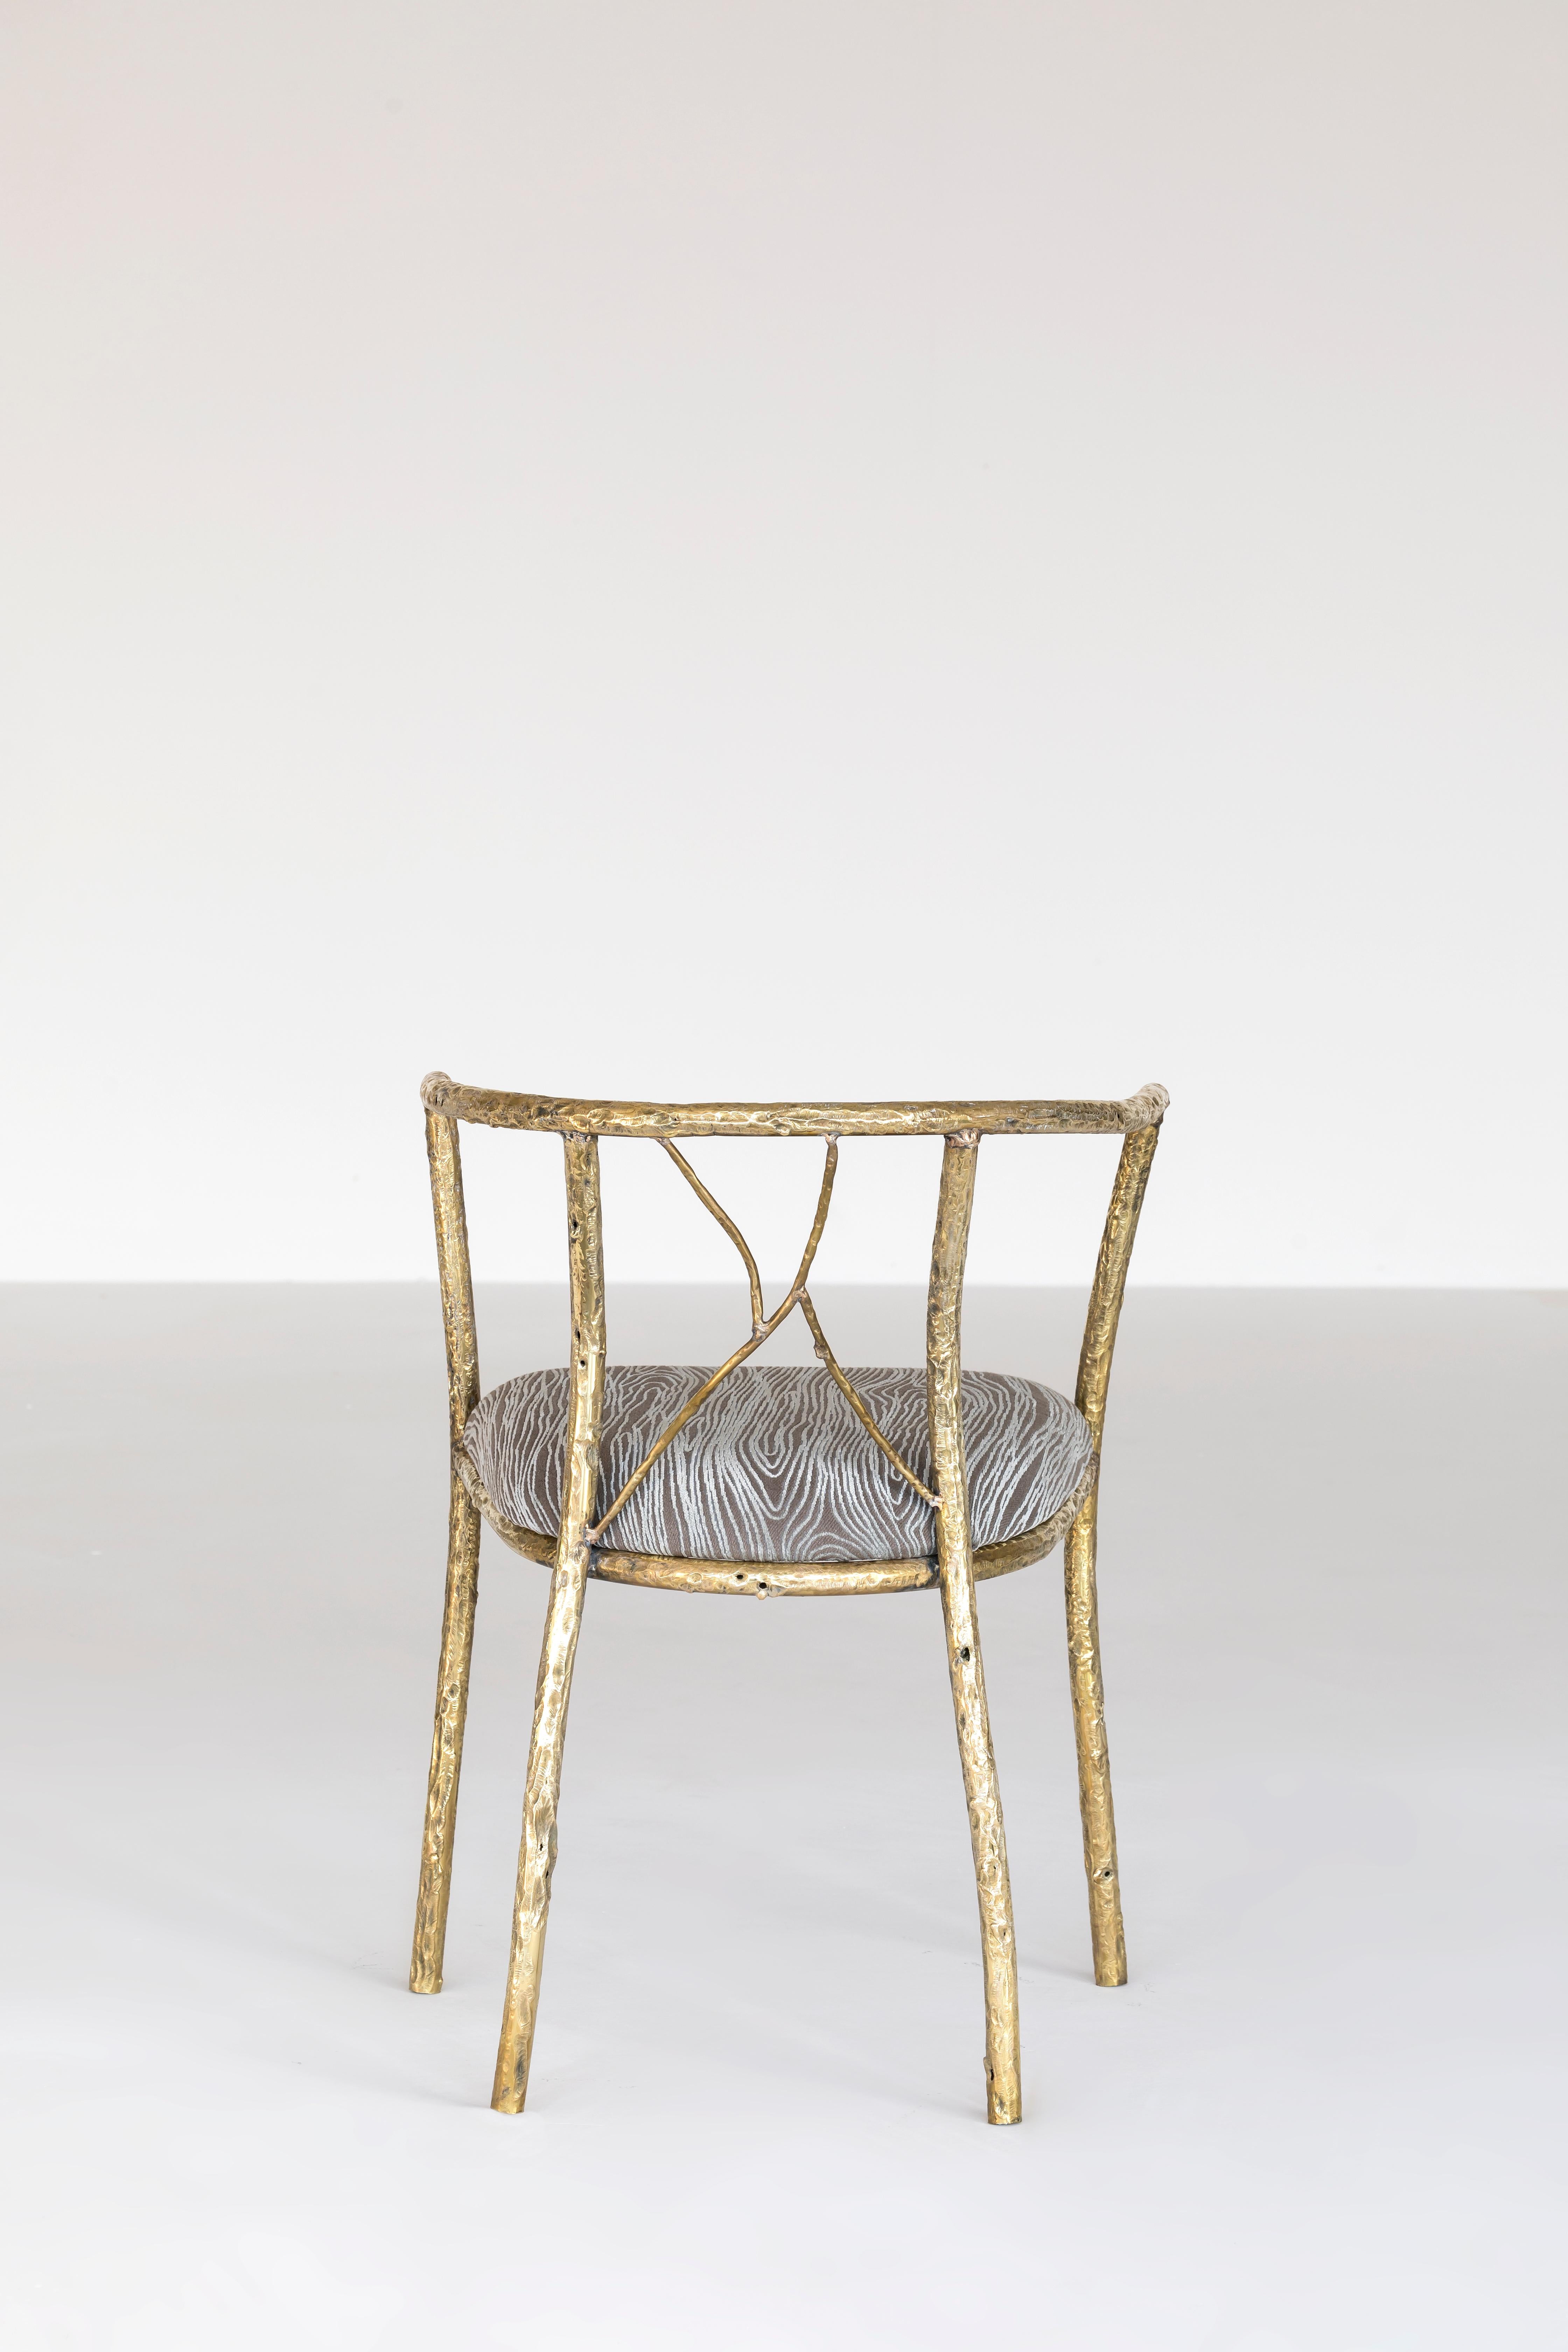 Organic Modern Brass Chair by Samuel Costantini For Sale